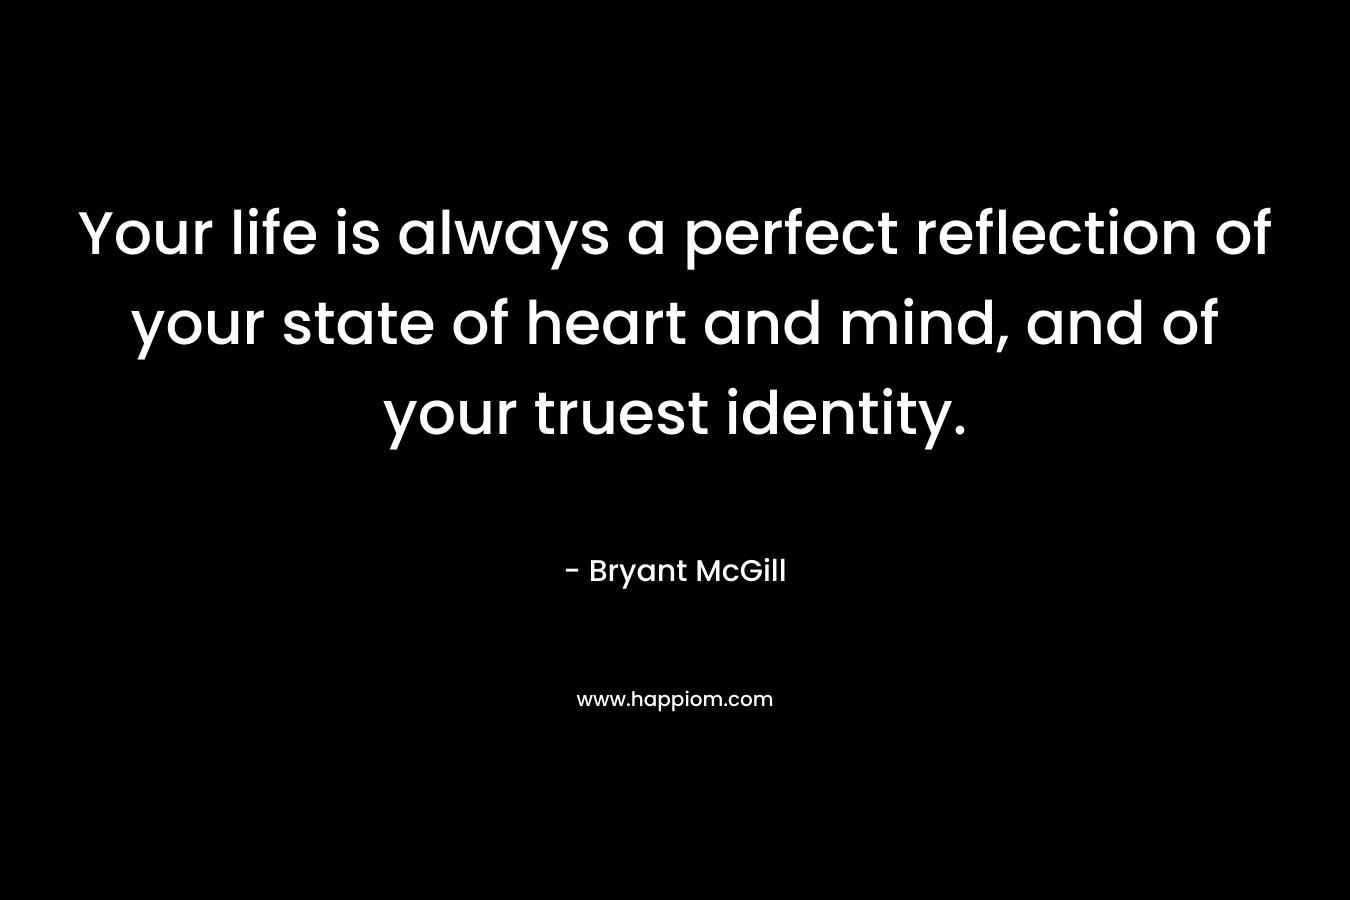 Your life is always a perfect reflection of your state of heart and mind, and of your truest identity.